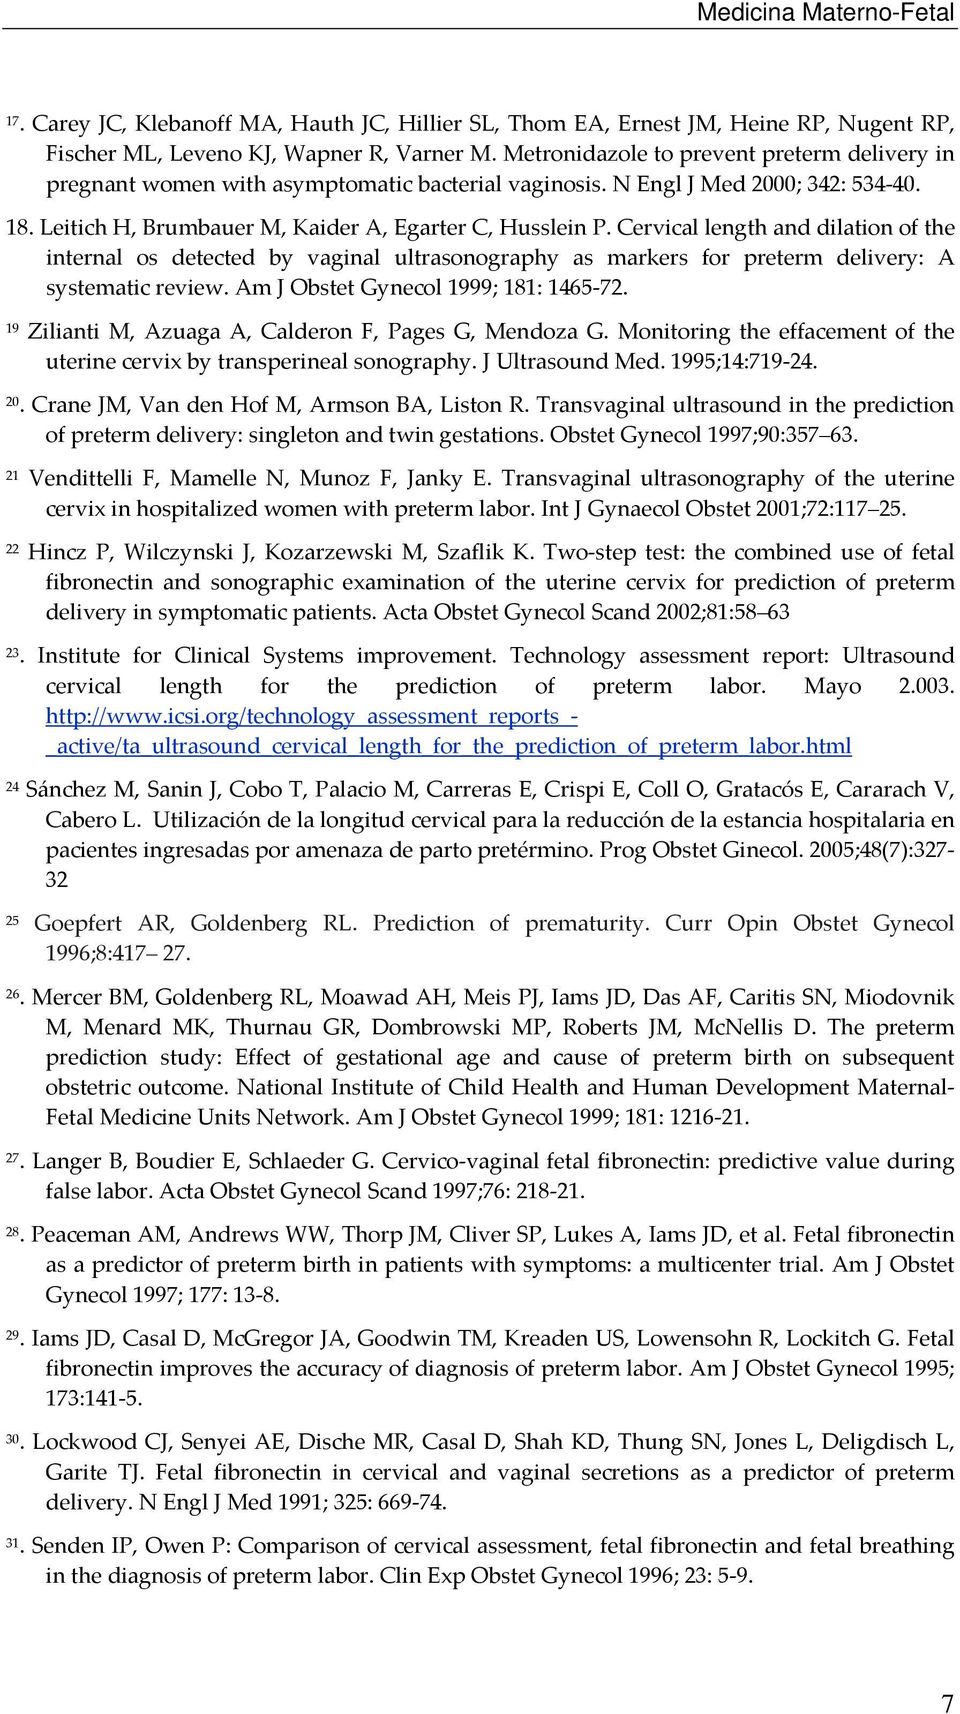 Cervical length and dilation of the internal os detected by vaginal ultrasonography as markers for preterm delivery: A systematic review. Am J Obstet Gynecol 1999; 181: 1465 72.